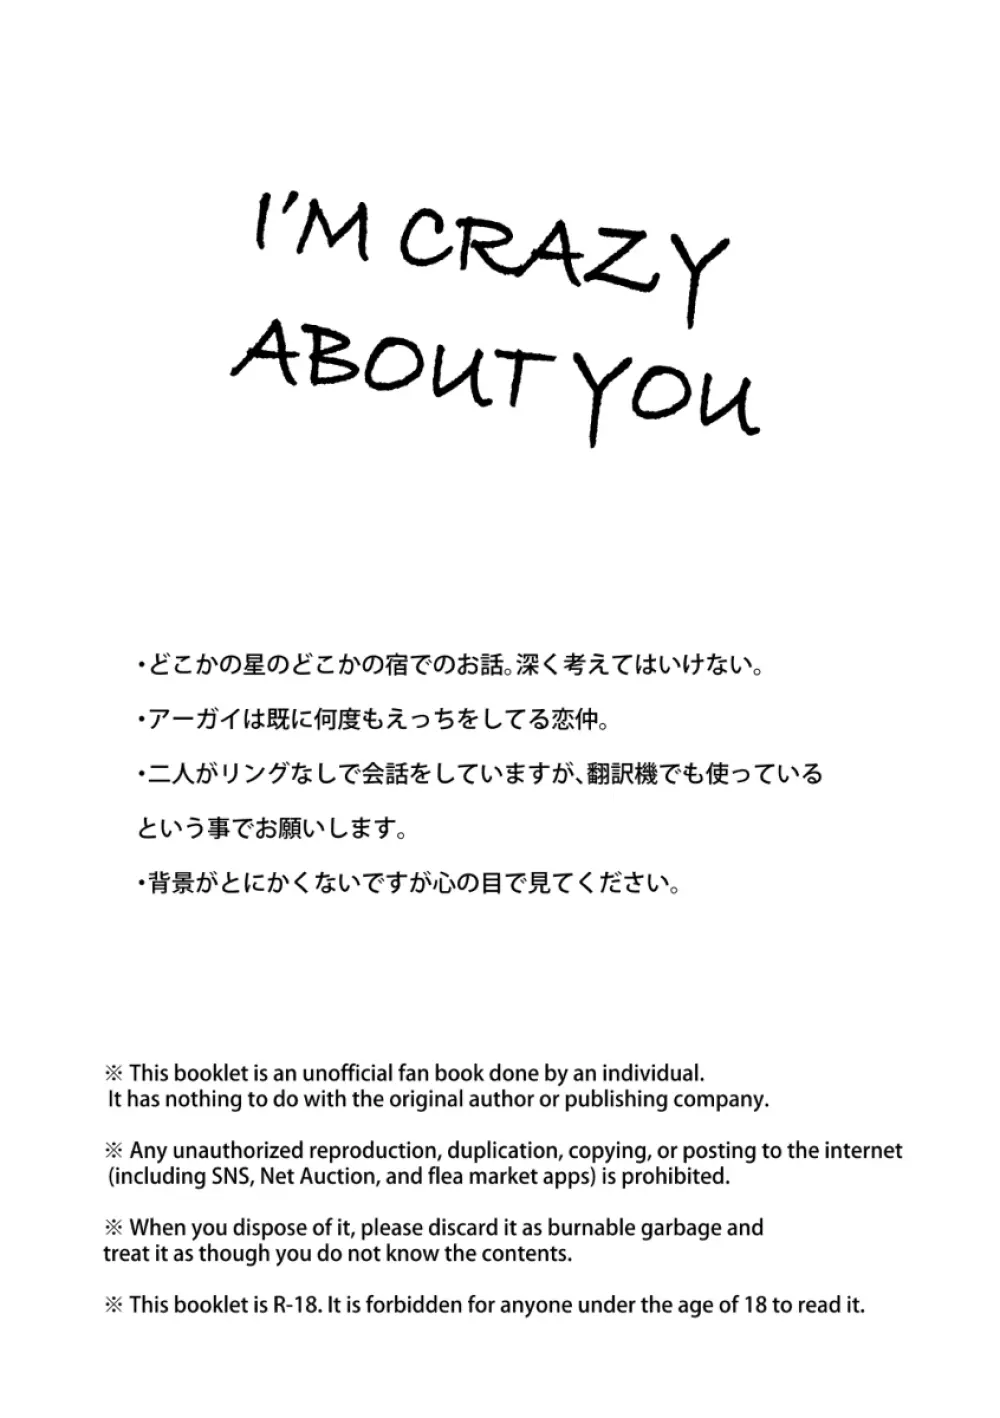 I’M CRAZY ABOUT YOU 2ページ